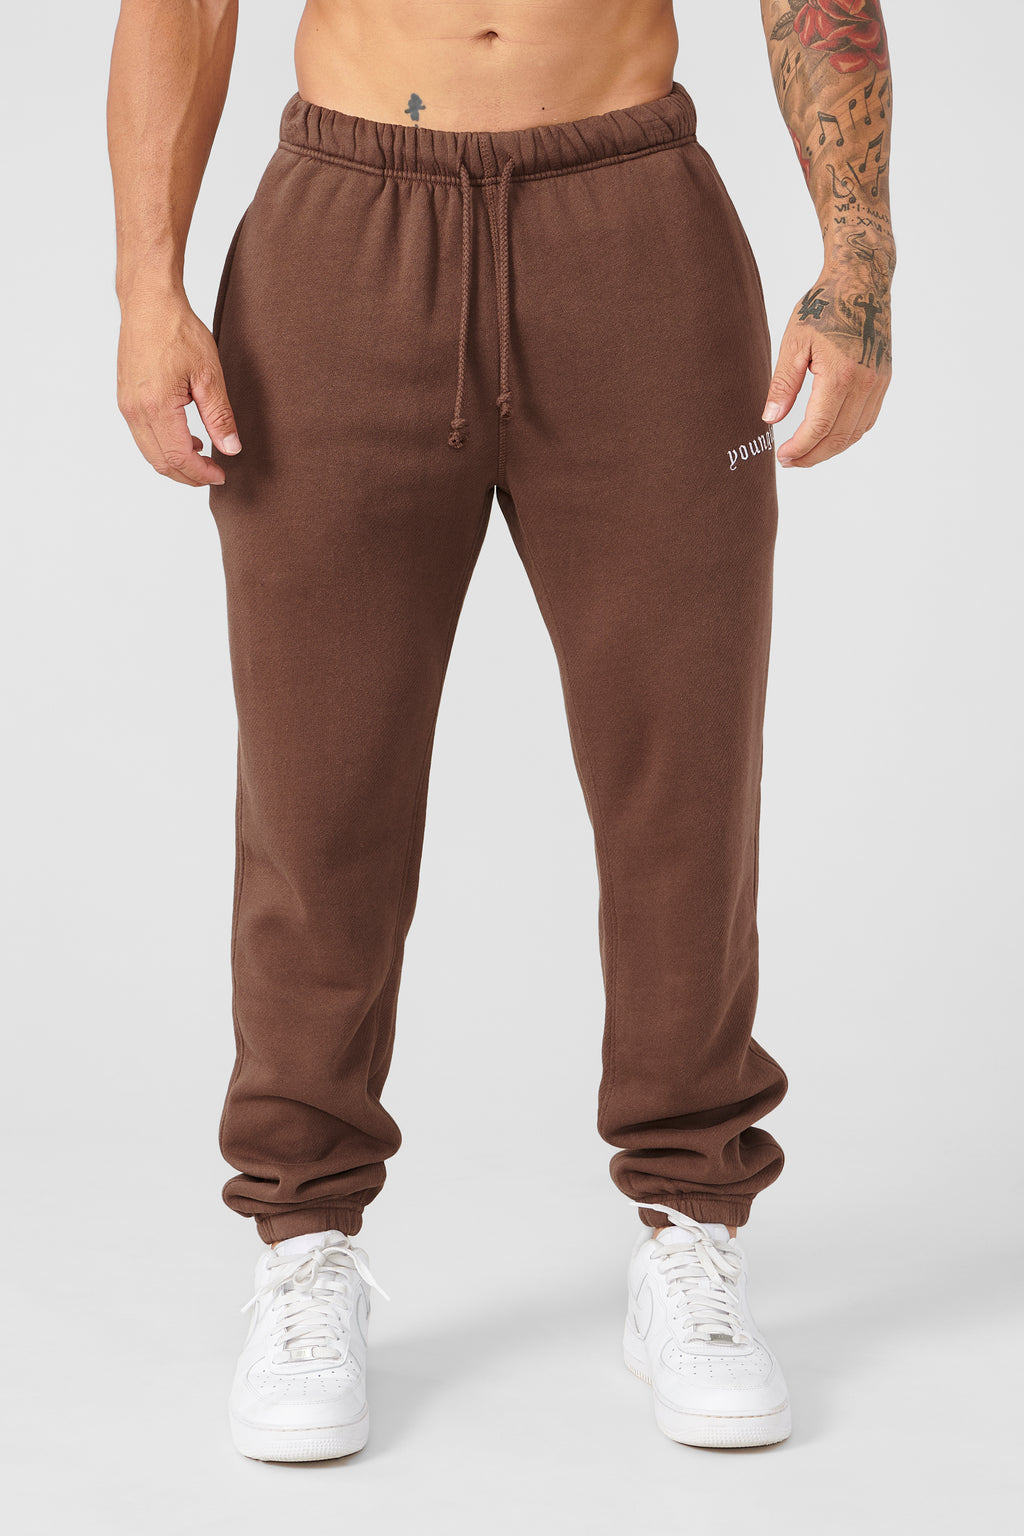 YoungLA Earthy Collection Jogger NEW LAUNCH, Men's Fashion, Bottoms,  Joggers on Carousell